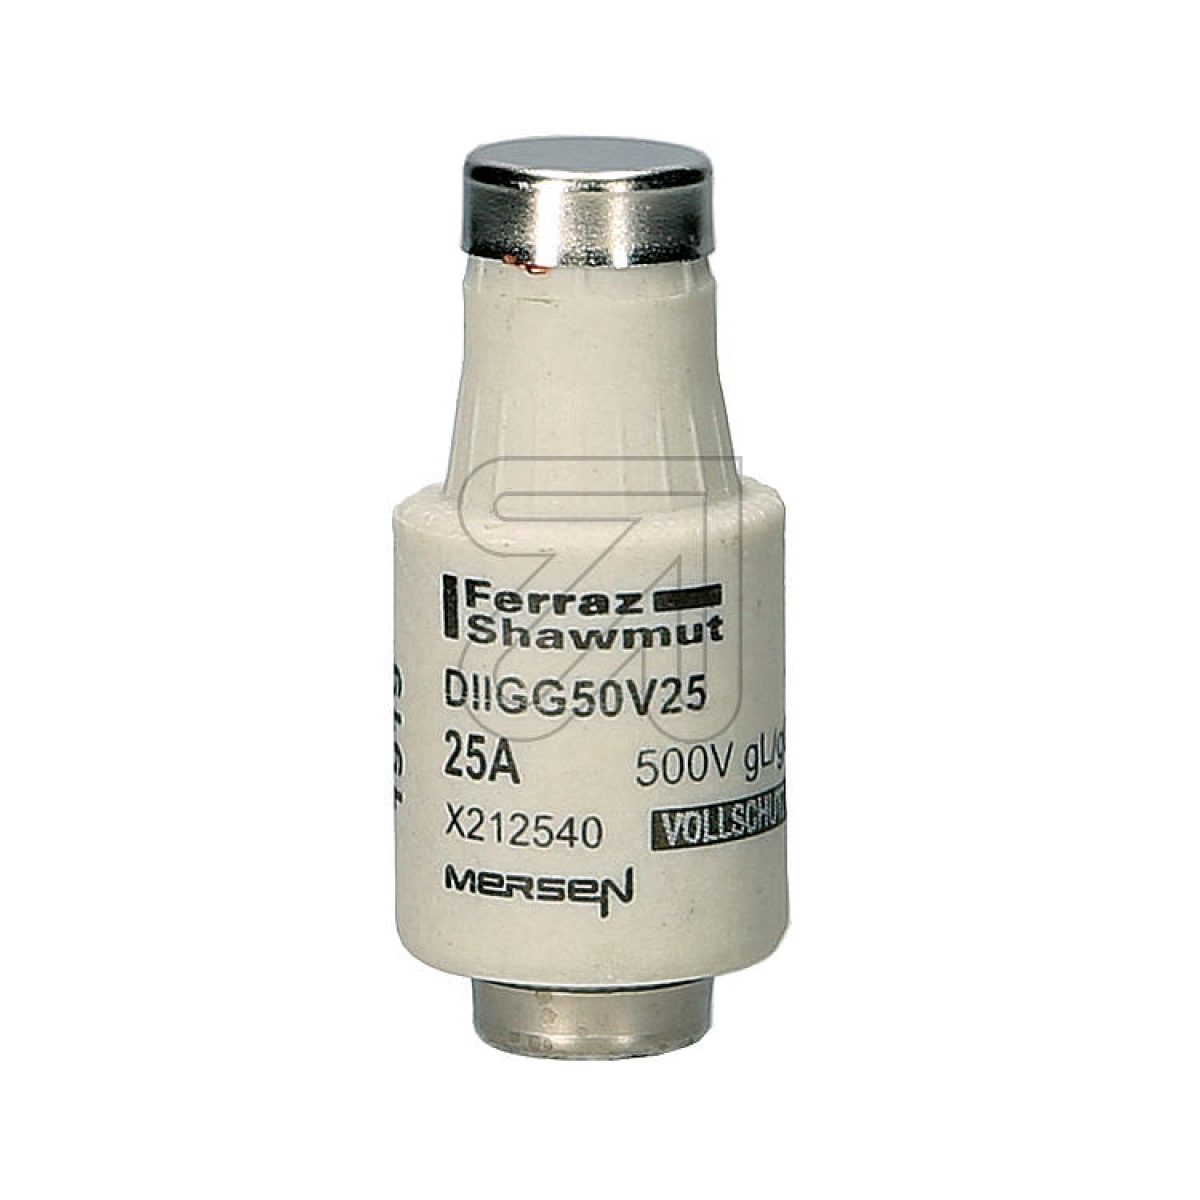 MERSENDII fuse links gG 25A-Price for 5 pcs.Article-No: 184035